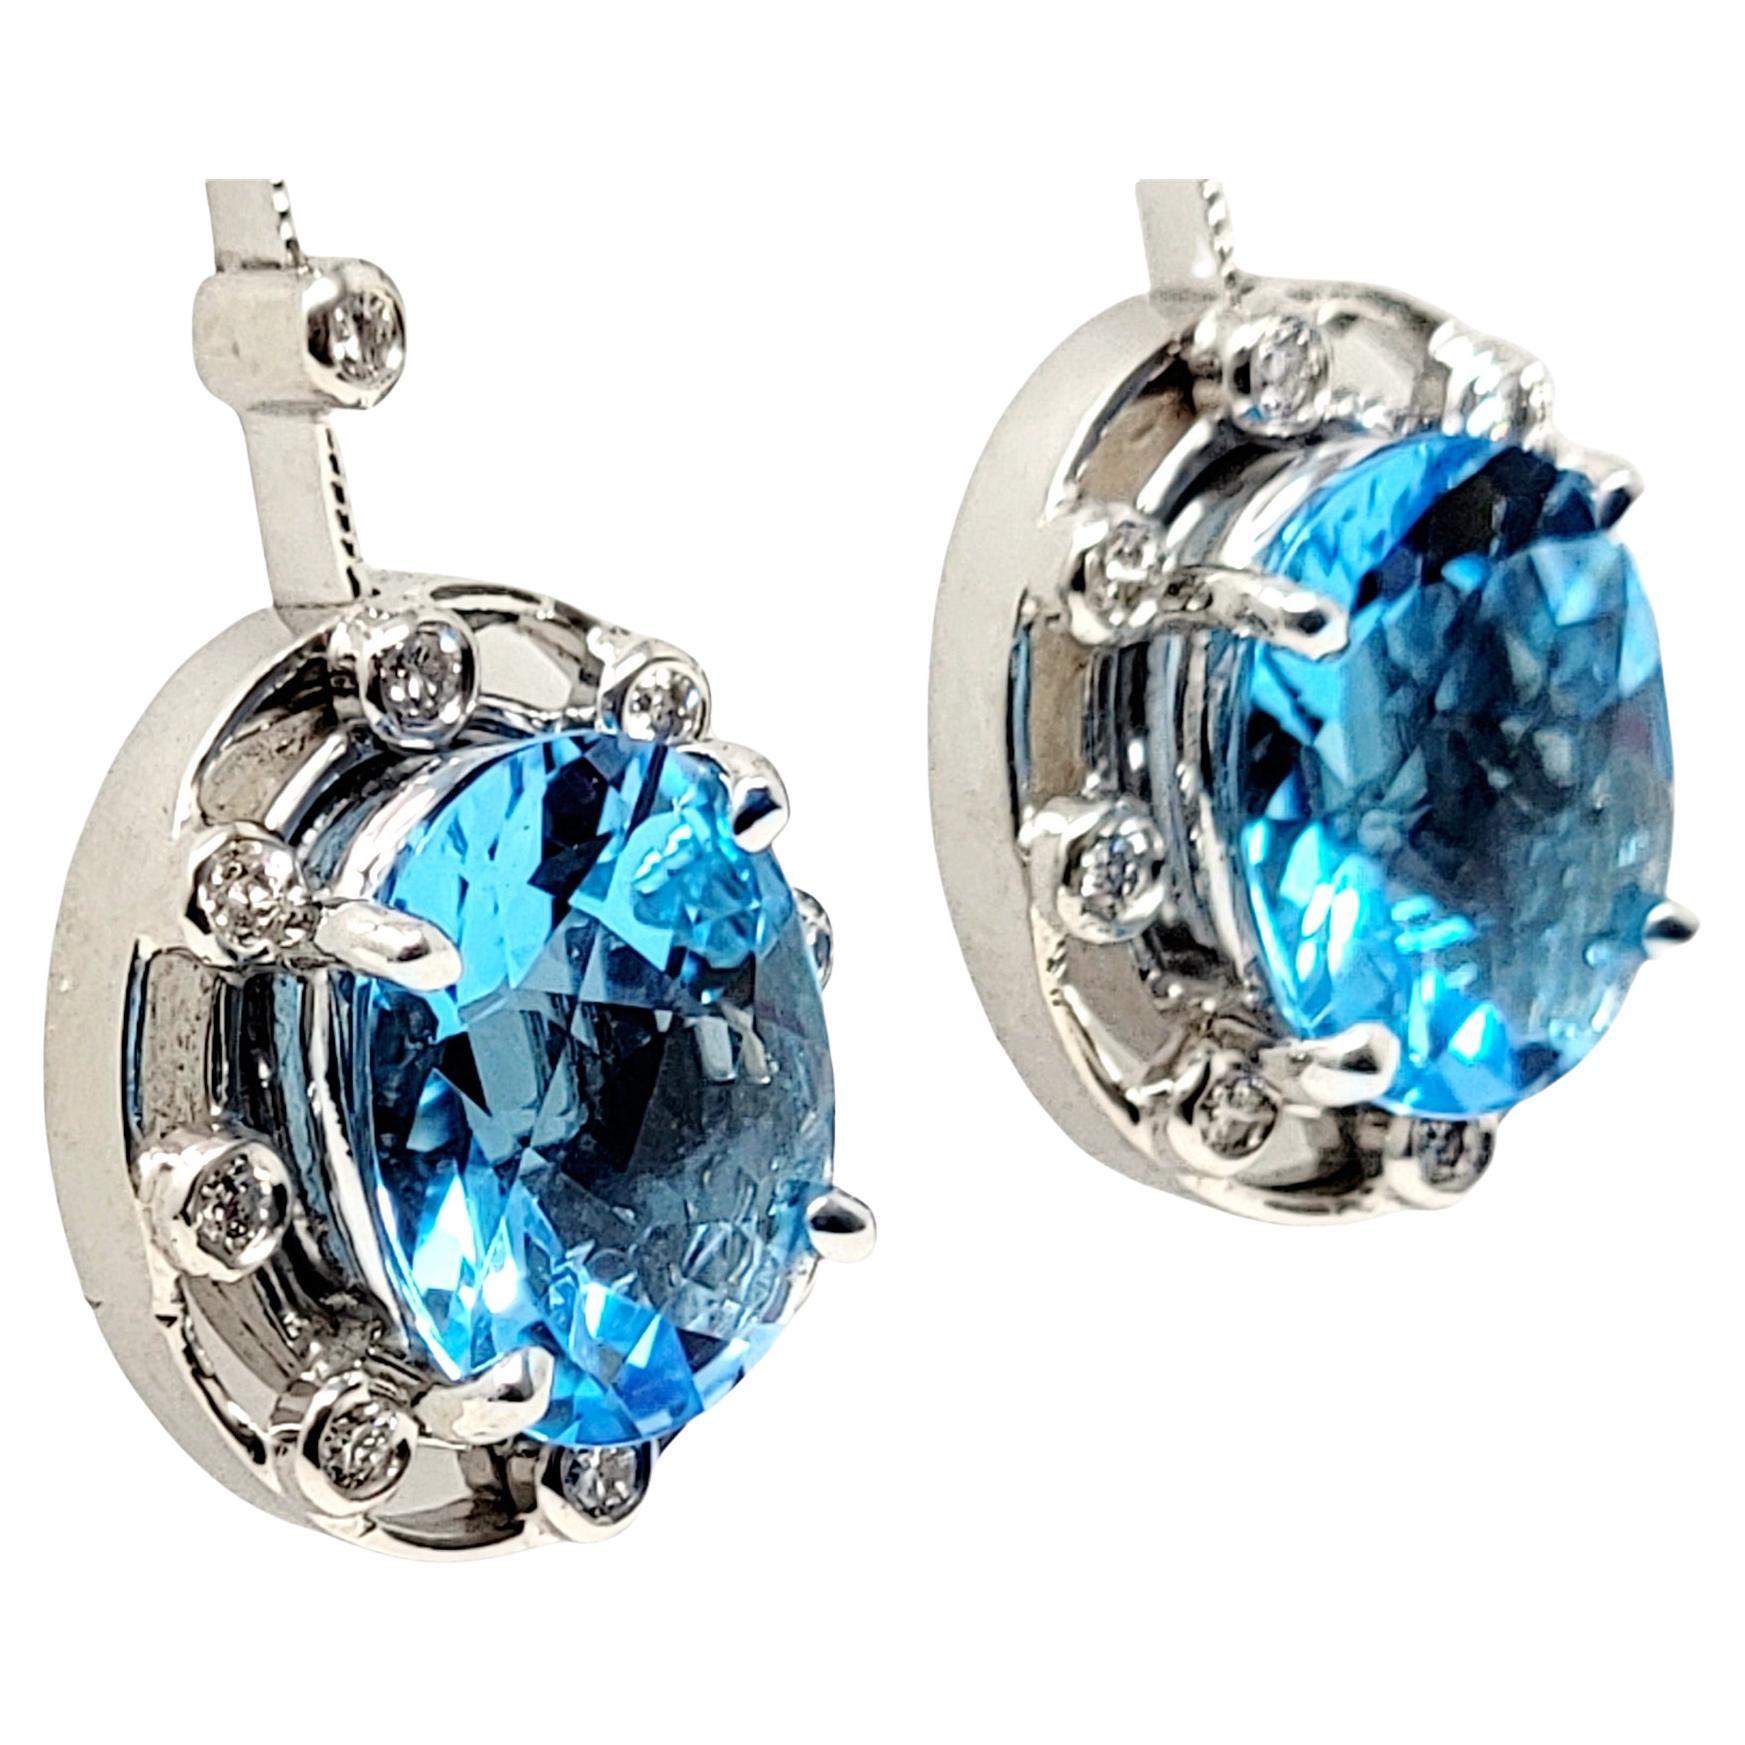 Incredible bright blue topaz drop earrings with shimmering diamond accents and polished 18 karat white gold. The contemporary beauties pop on the ear and look amazing!

Earring type: Drop
Metal: 18K White Gold
Weight: 6.5 grams
Natural Topaz: 6.12